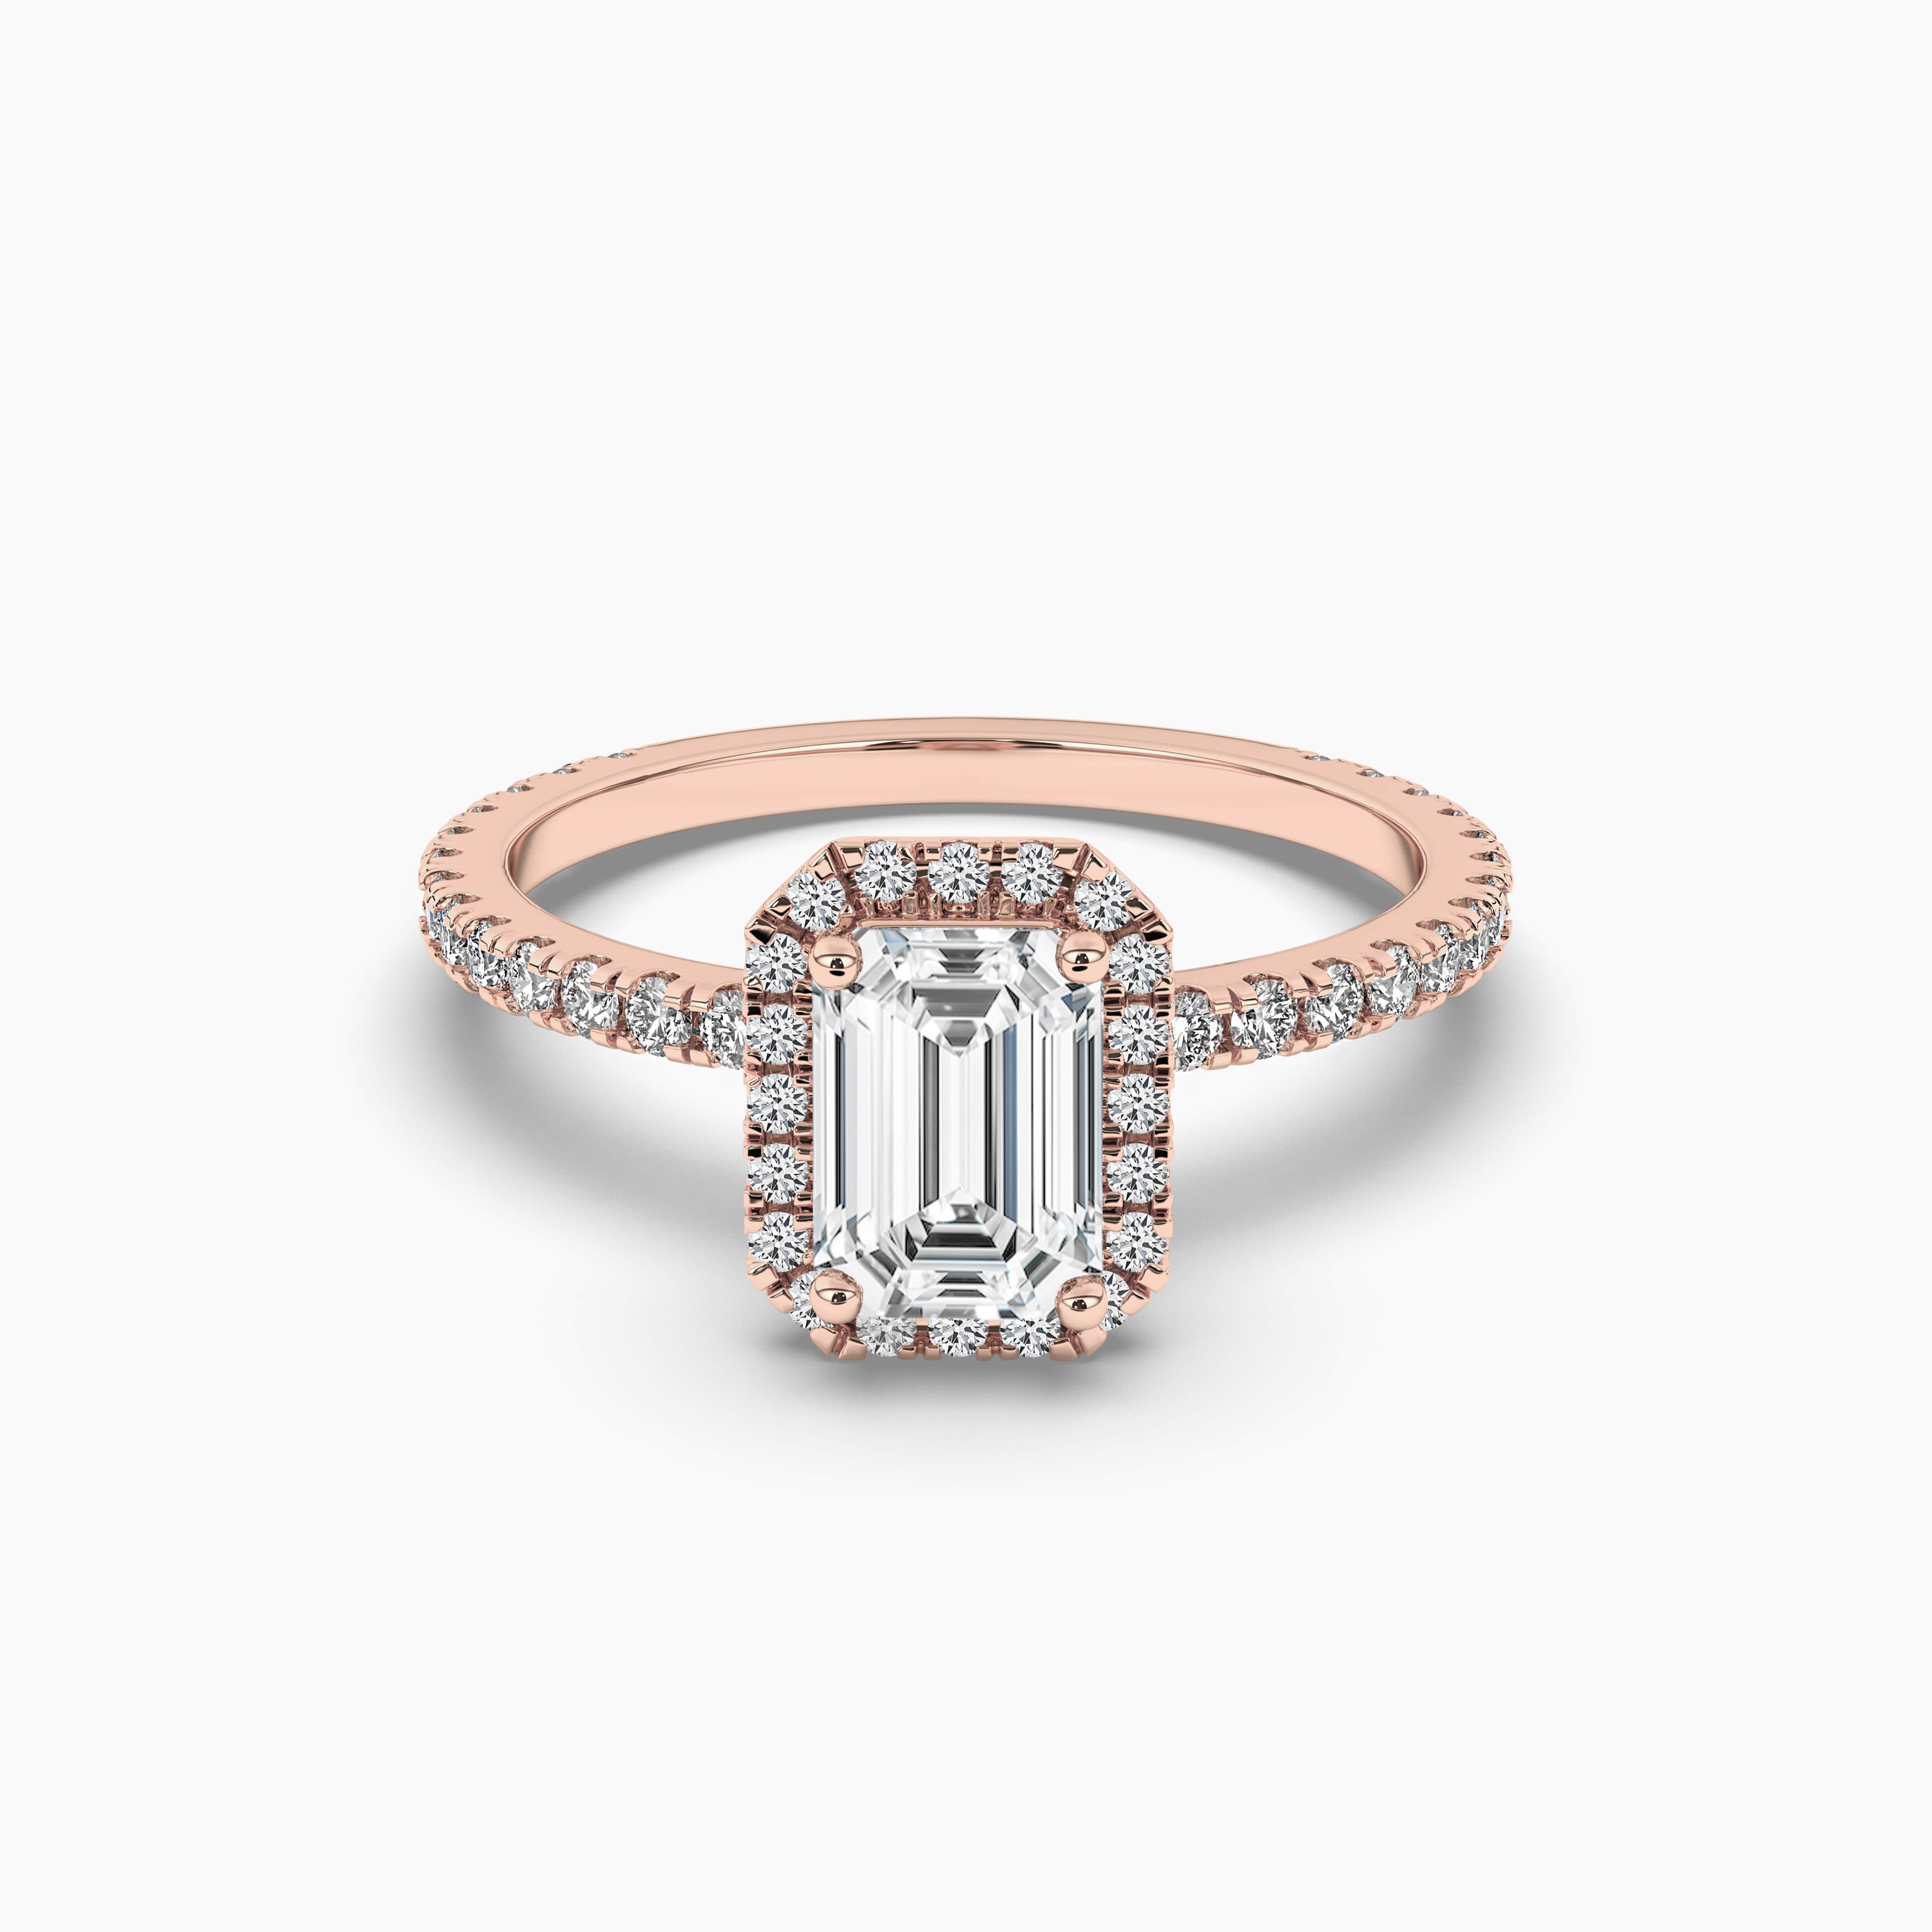 EMERALD CUT DIAMOND ENGAGEMENT RING IN ROSE GOLD